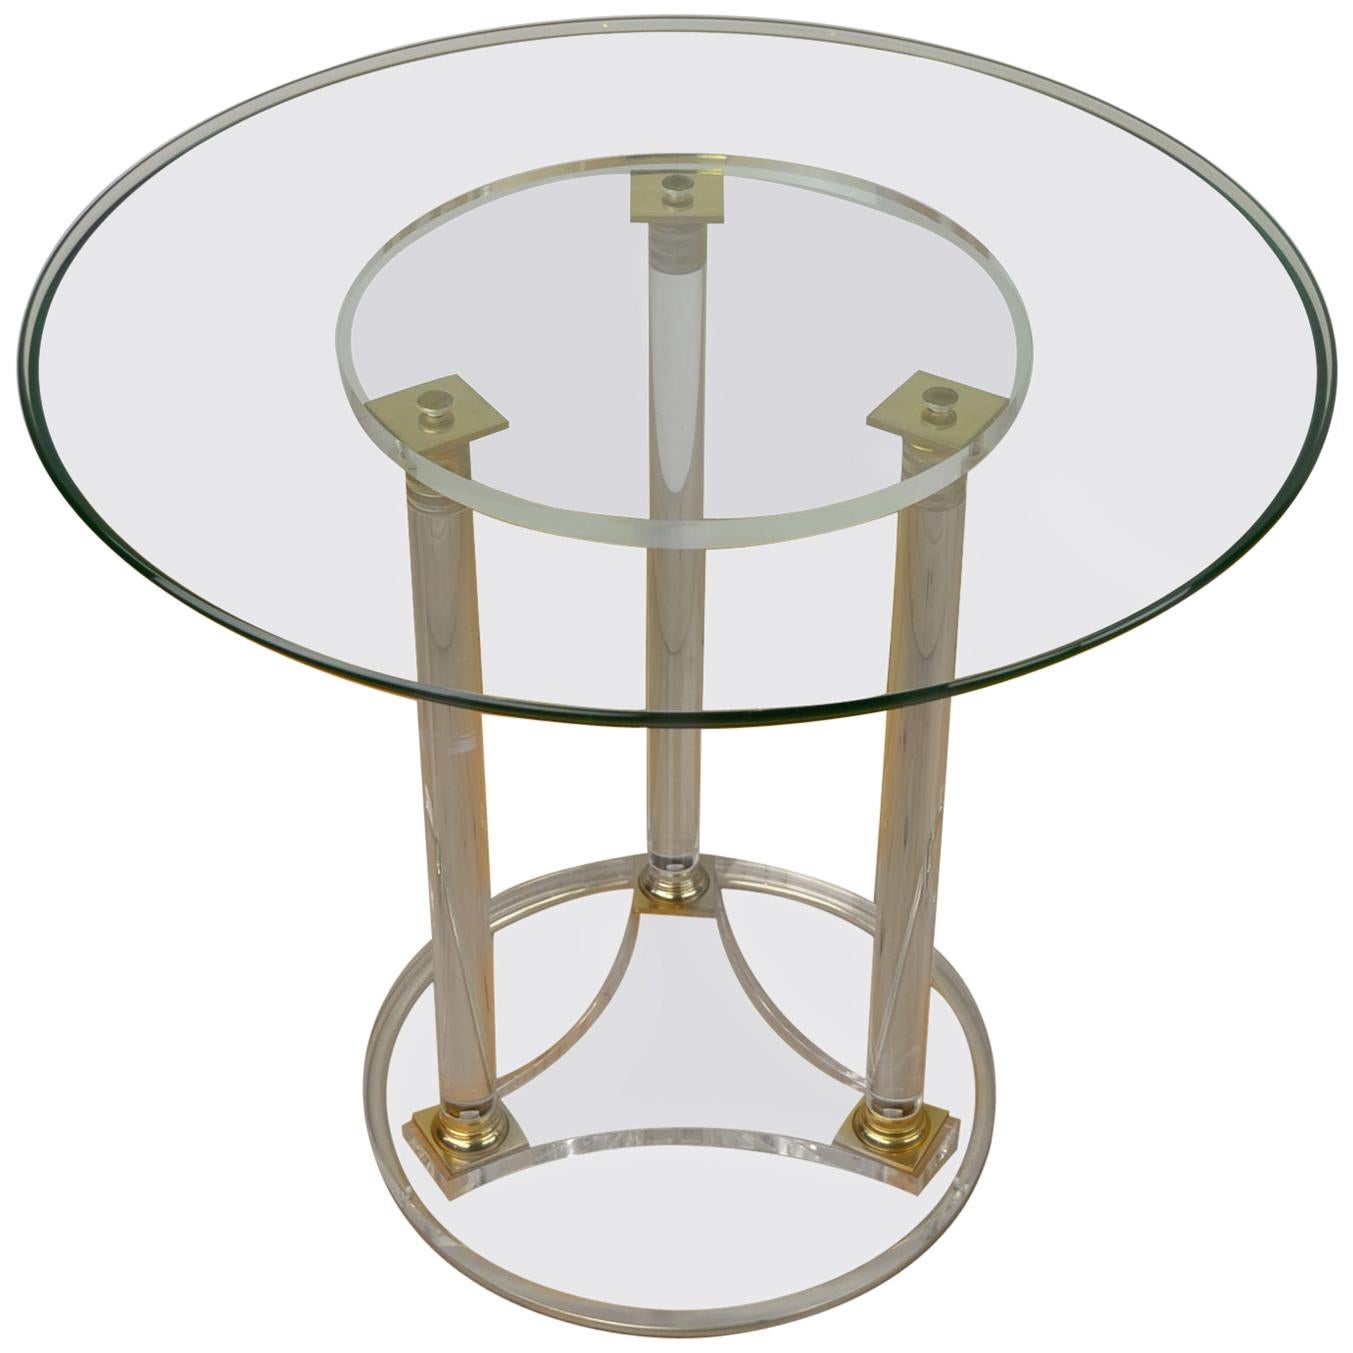 Round Lucite with Brass Side Table, Modern Design Table, France, 1970s For Sale